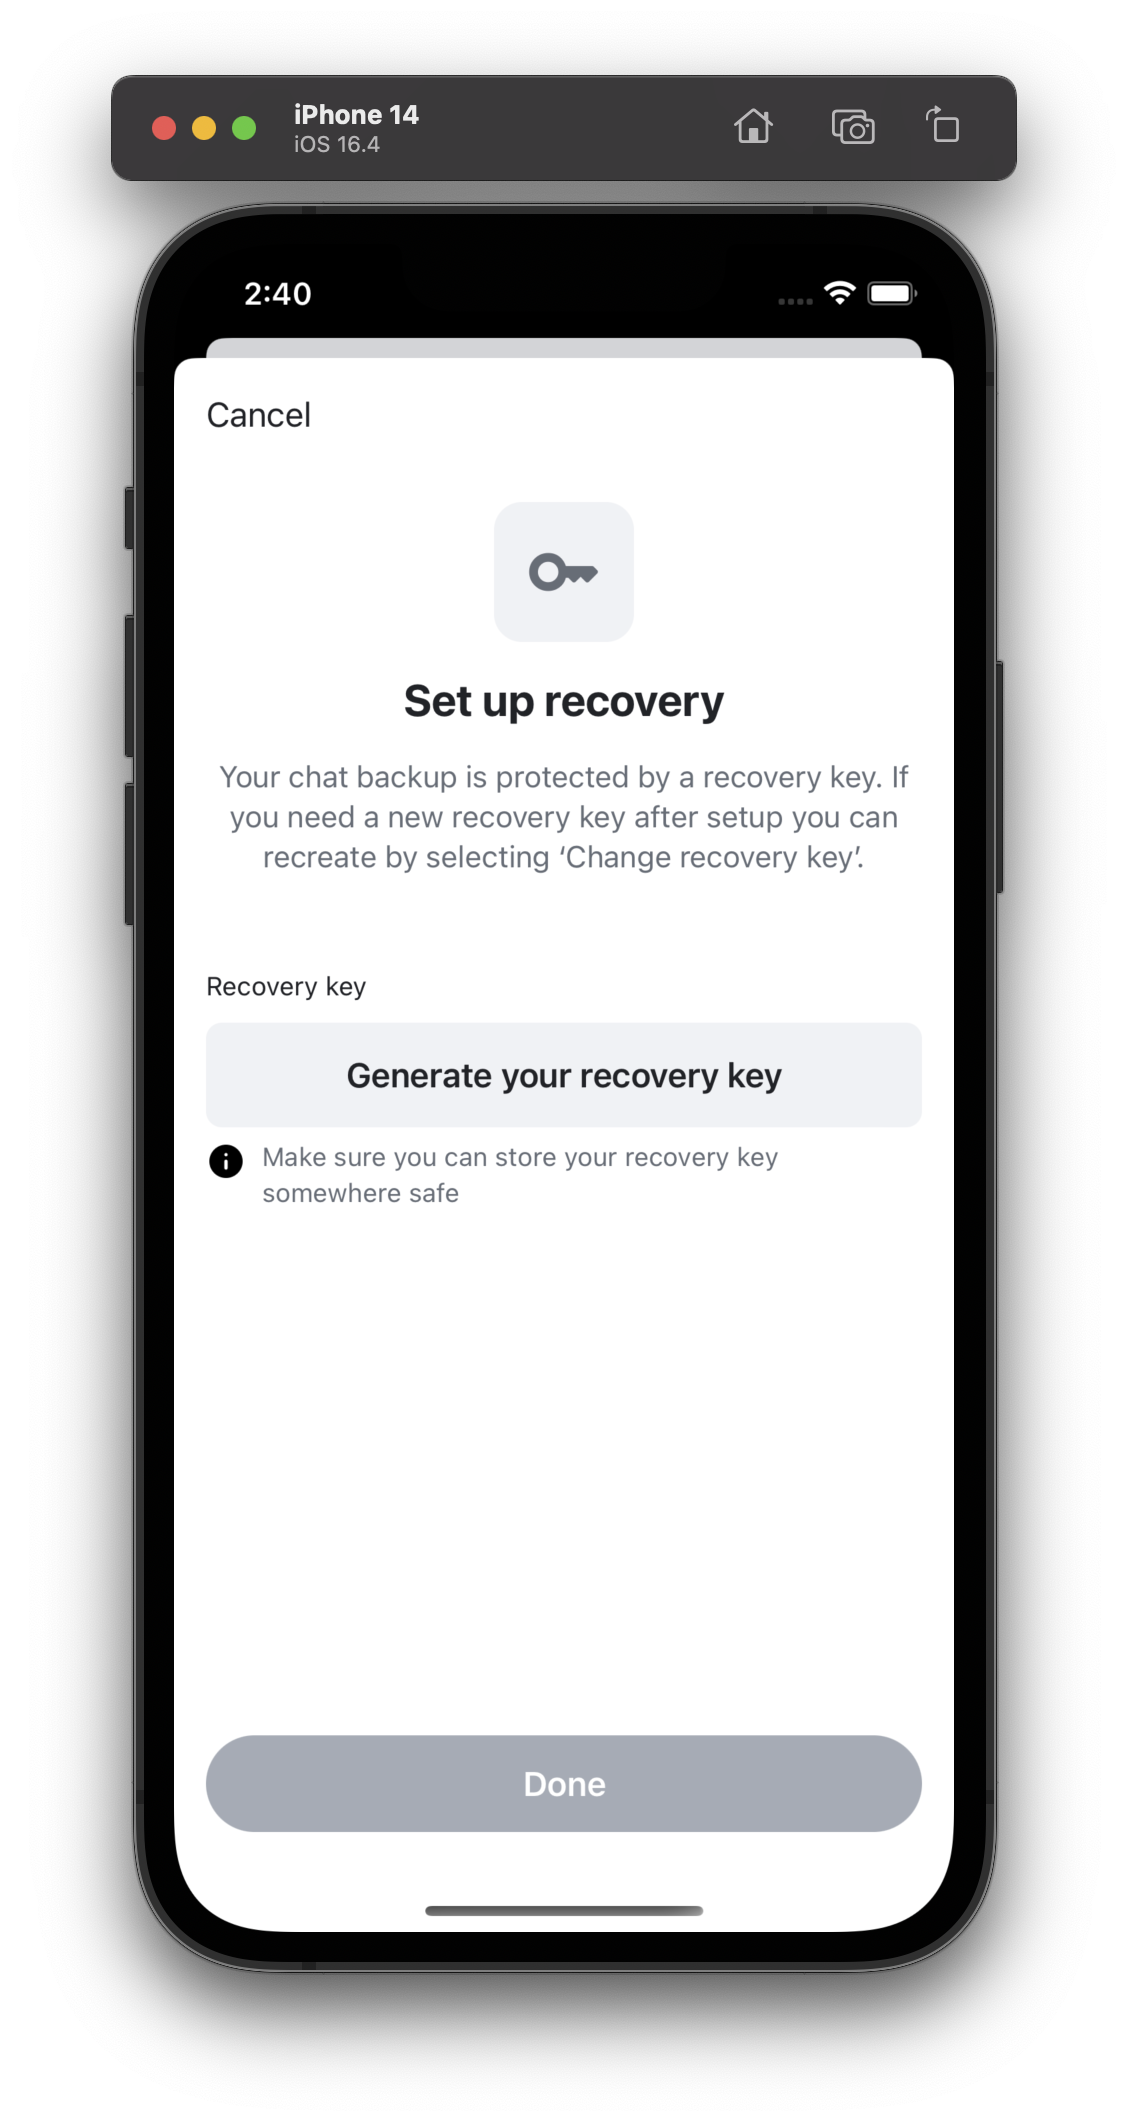 An iOS dialog saying "Set up recovery" at the top, a description explaining the recovery key and a button to generate it. At the very bottom is a "Done" Button.